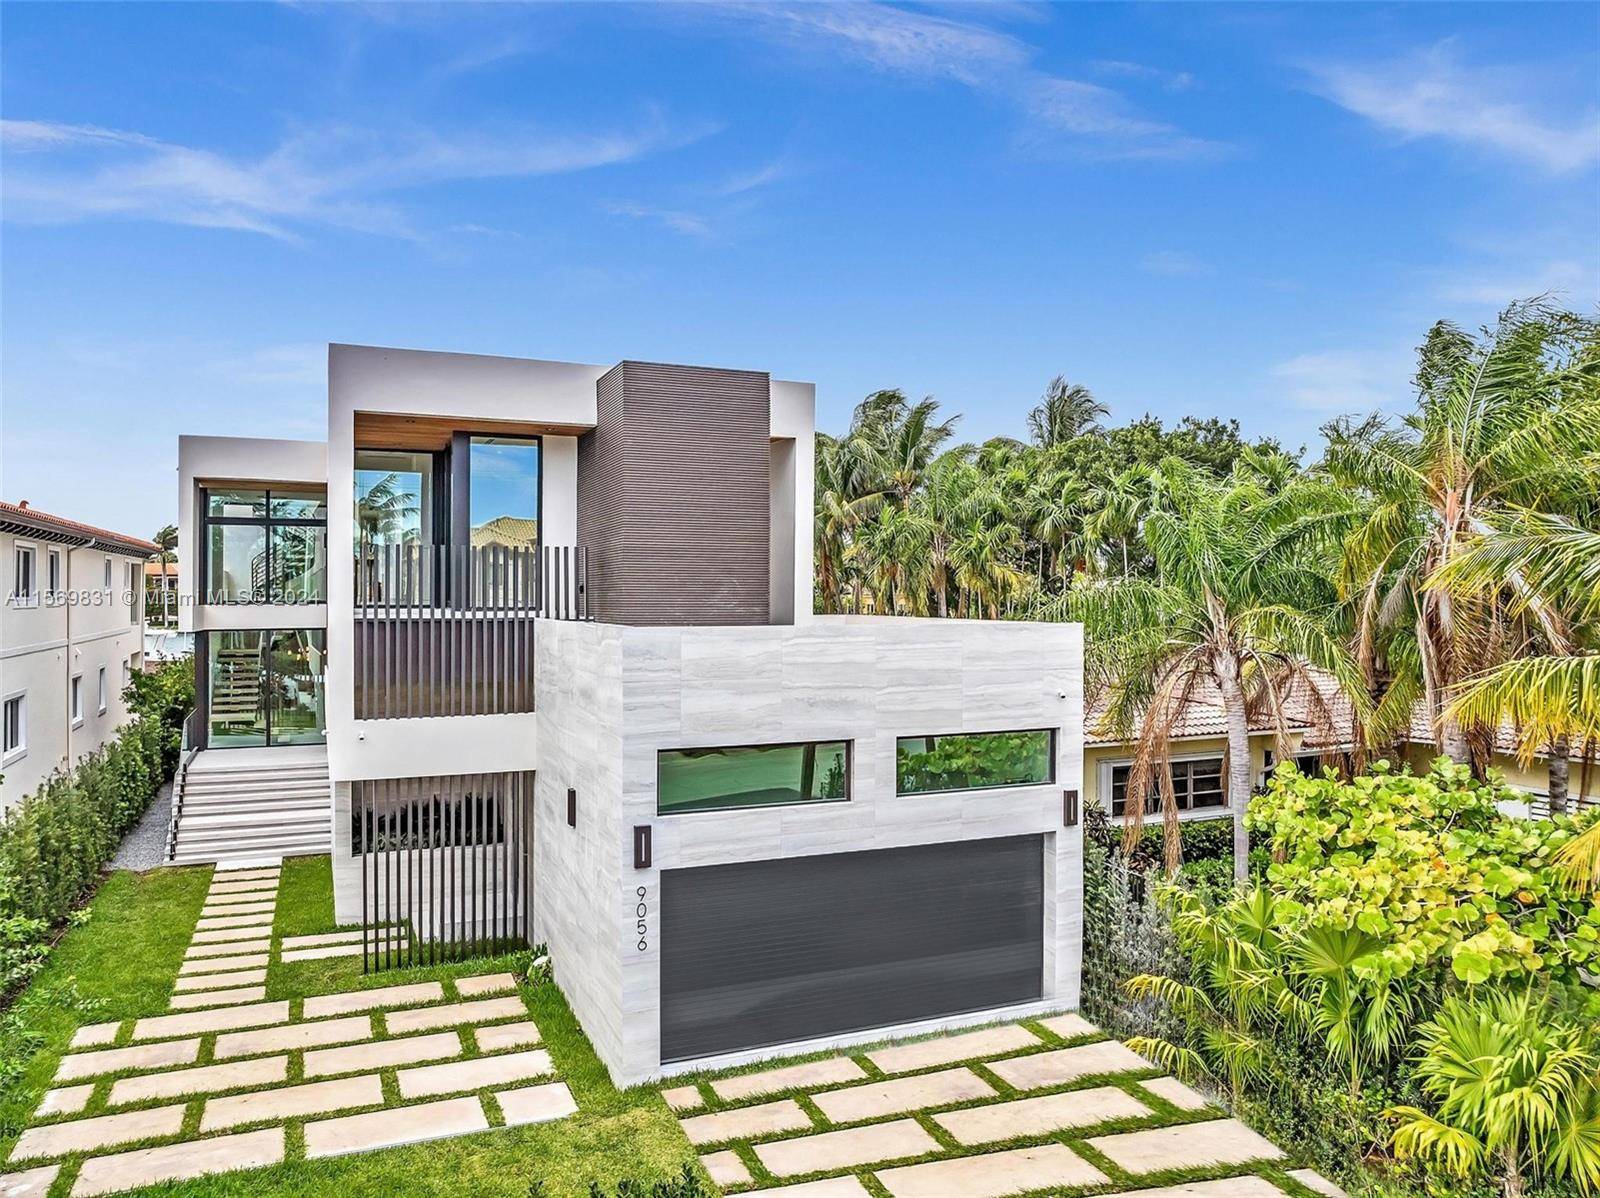 This newly built mansion offers an impressive 6, 565 SF of space, boasting 7 bedrooms, 7.